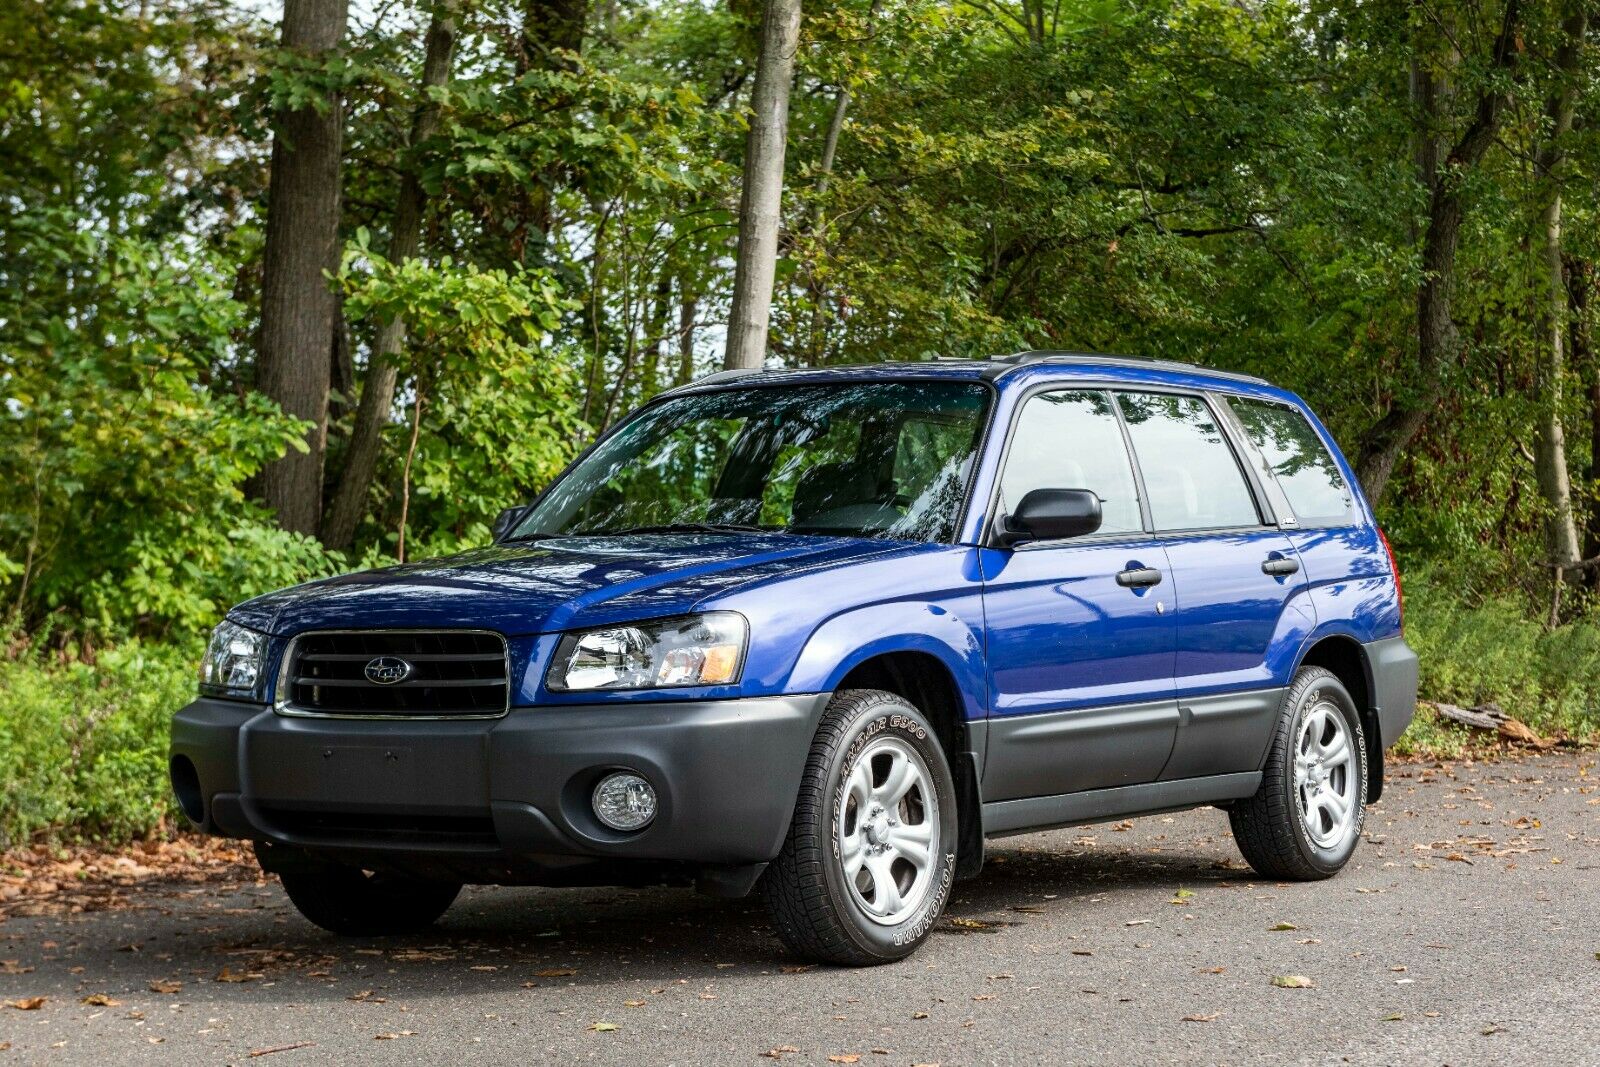 This Pristine 2003 Subaru Forester Has Just 6,450 Miles On